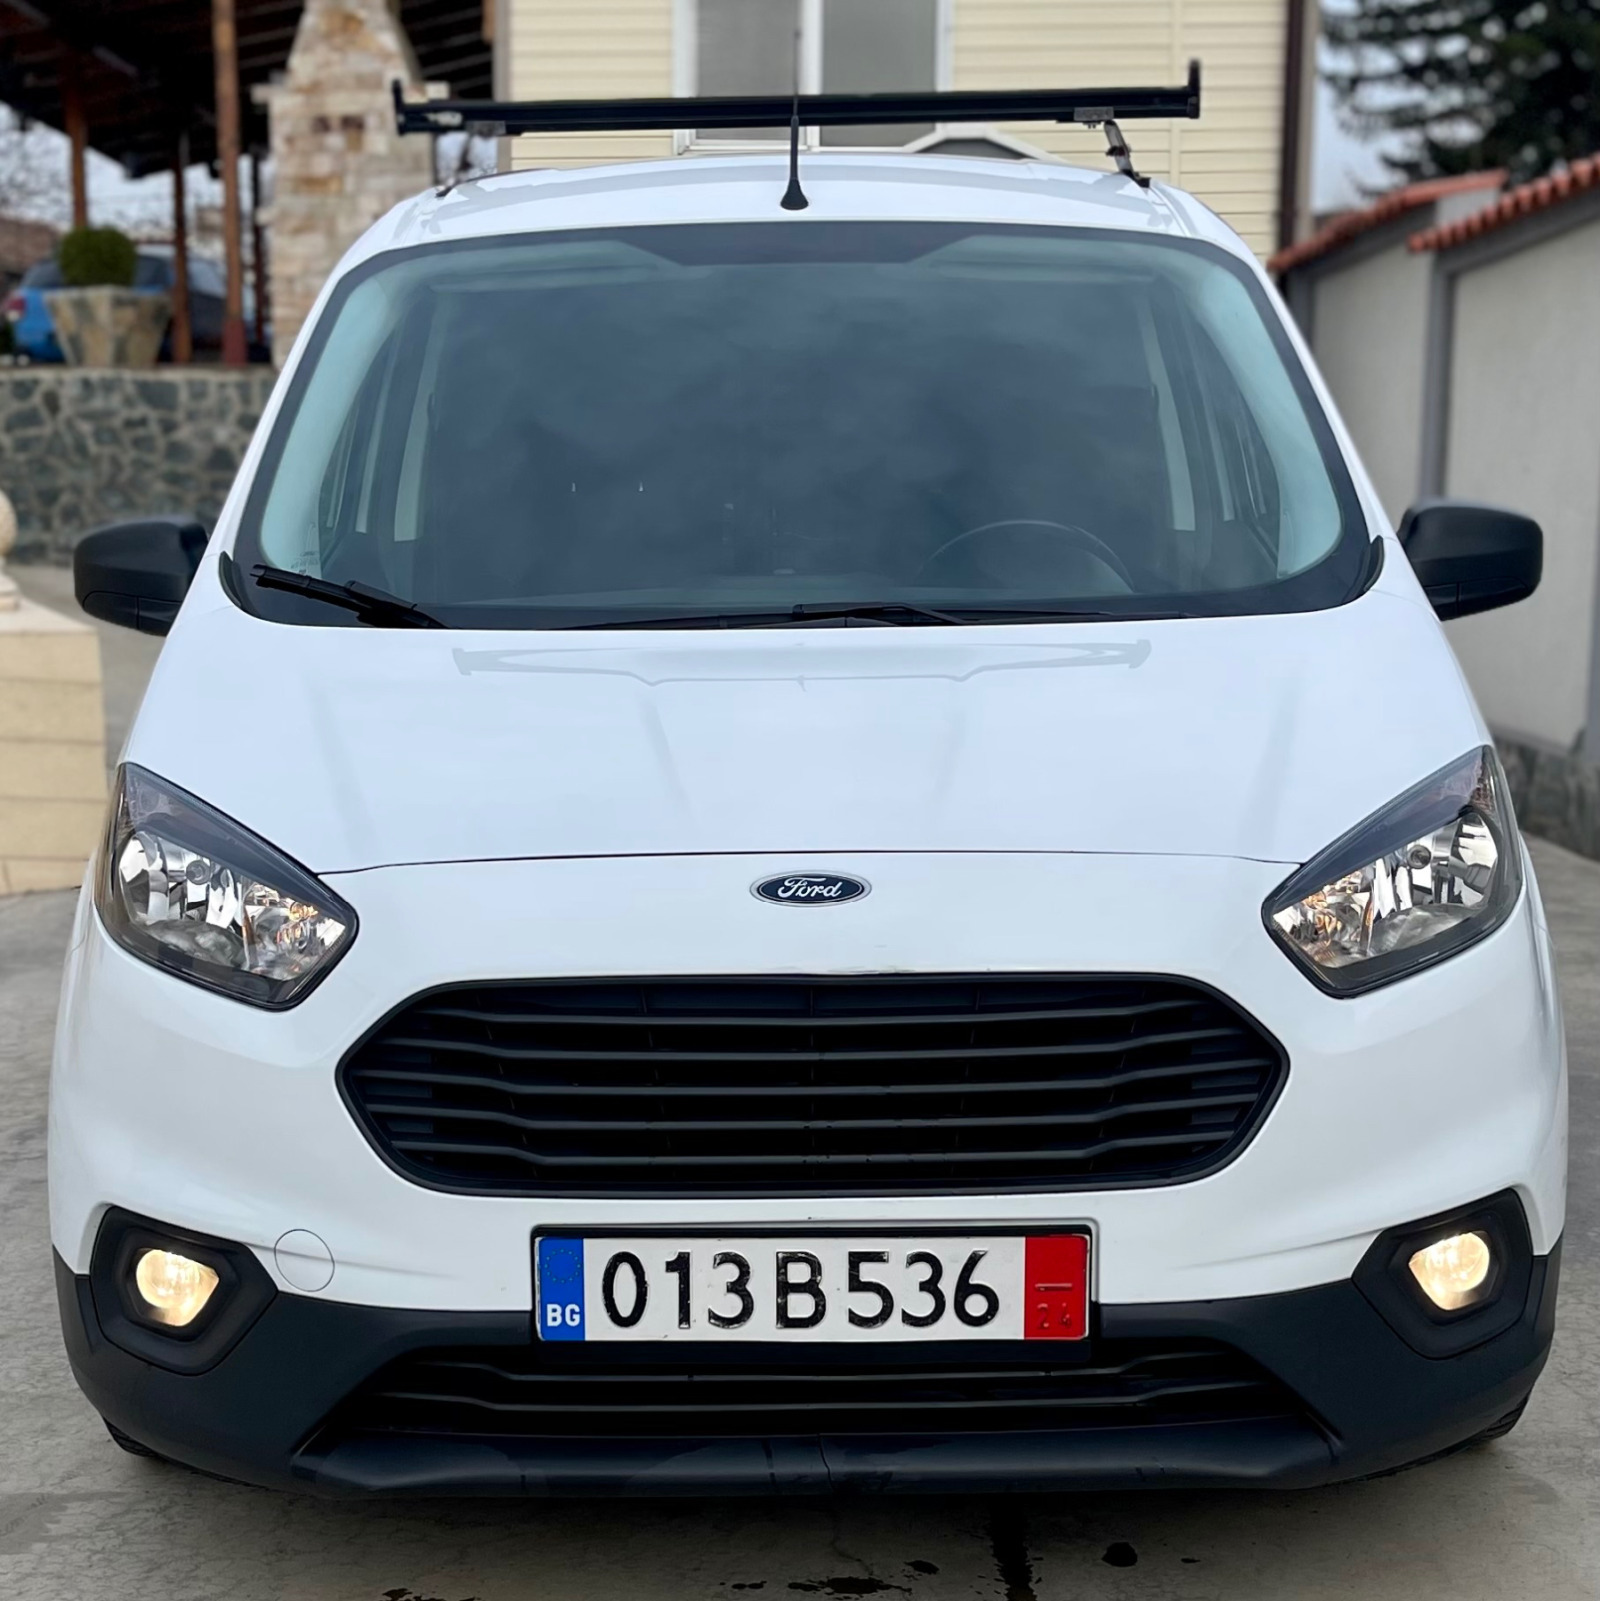 Ford Courier 1.5 TDCI Euro 6  - изображение 1